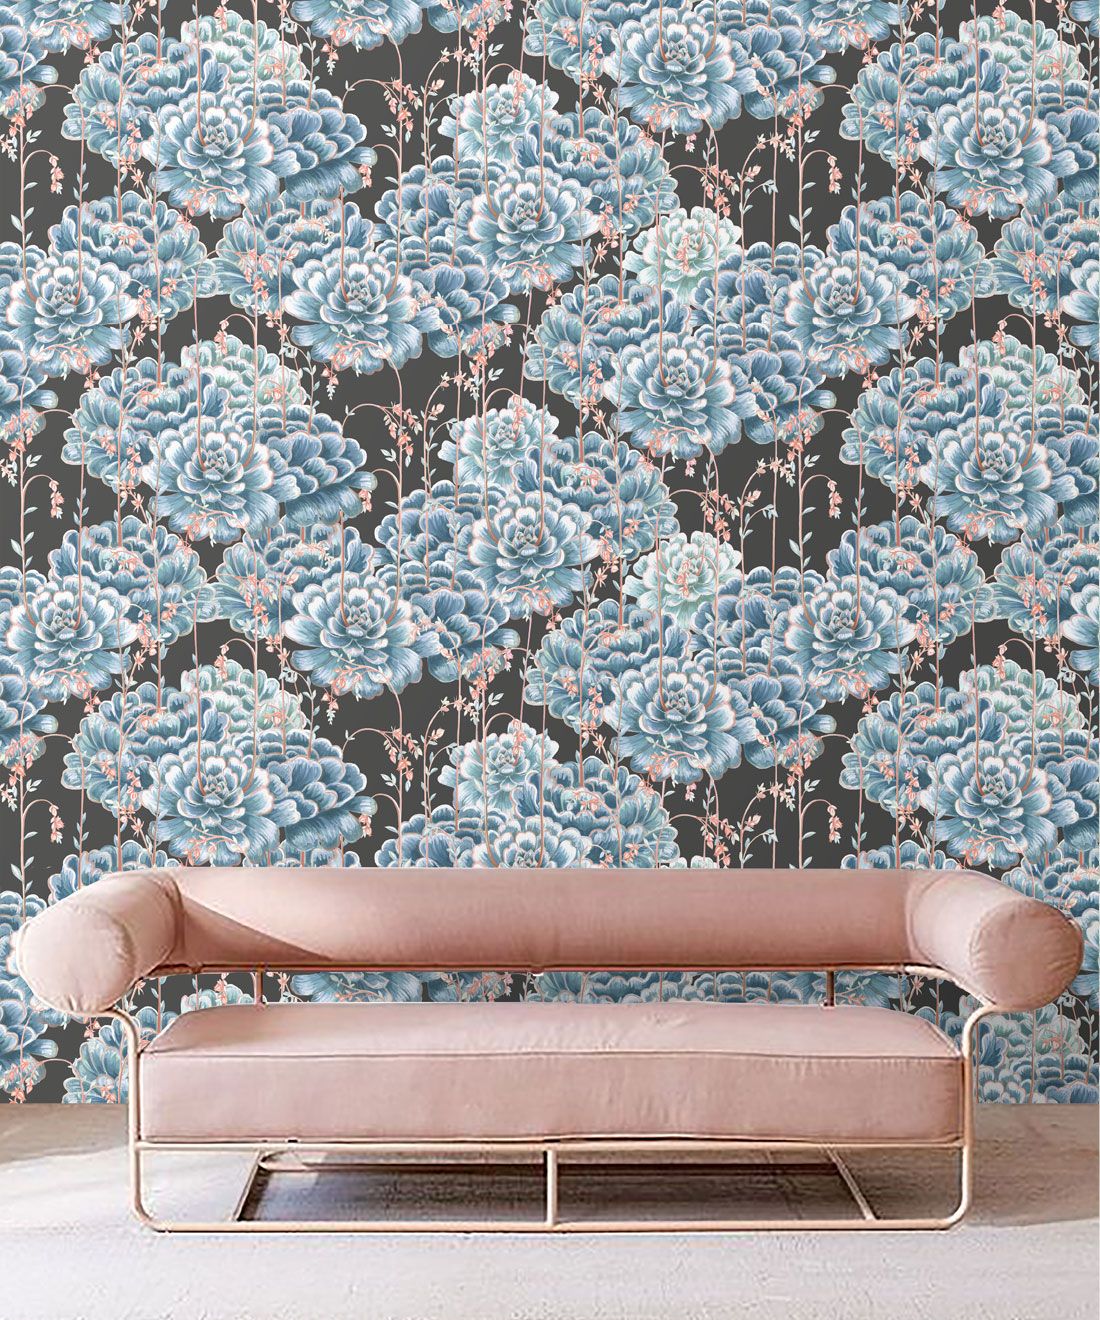 Succulents Wallpaper Blue Charcoal • Cactus Wallpaper • Desert Wallpaper Insitu on black background behind a sofa with pink cushions